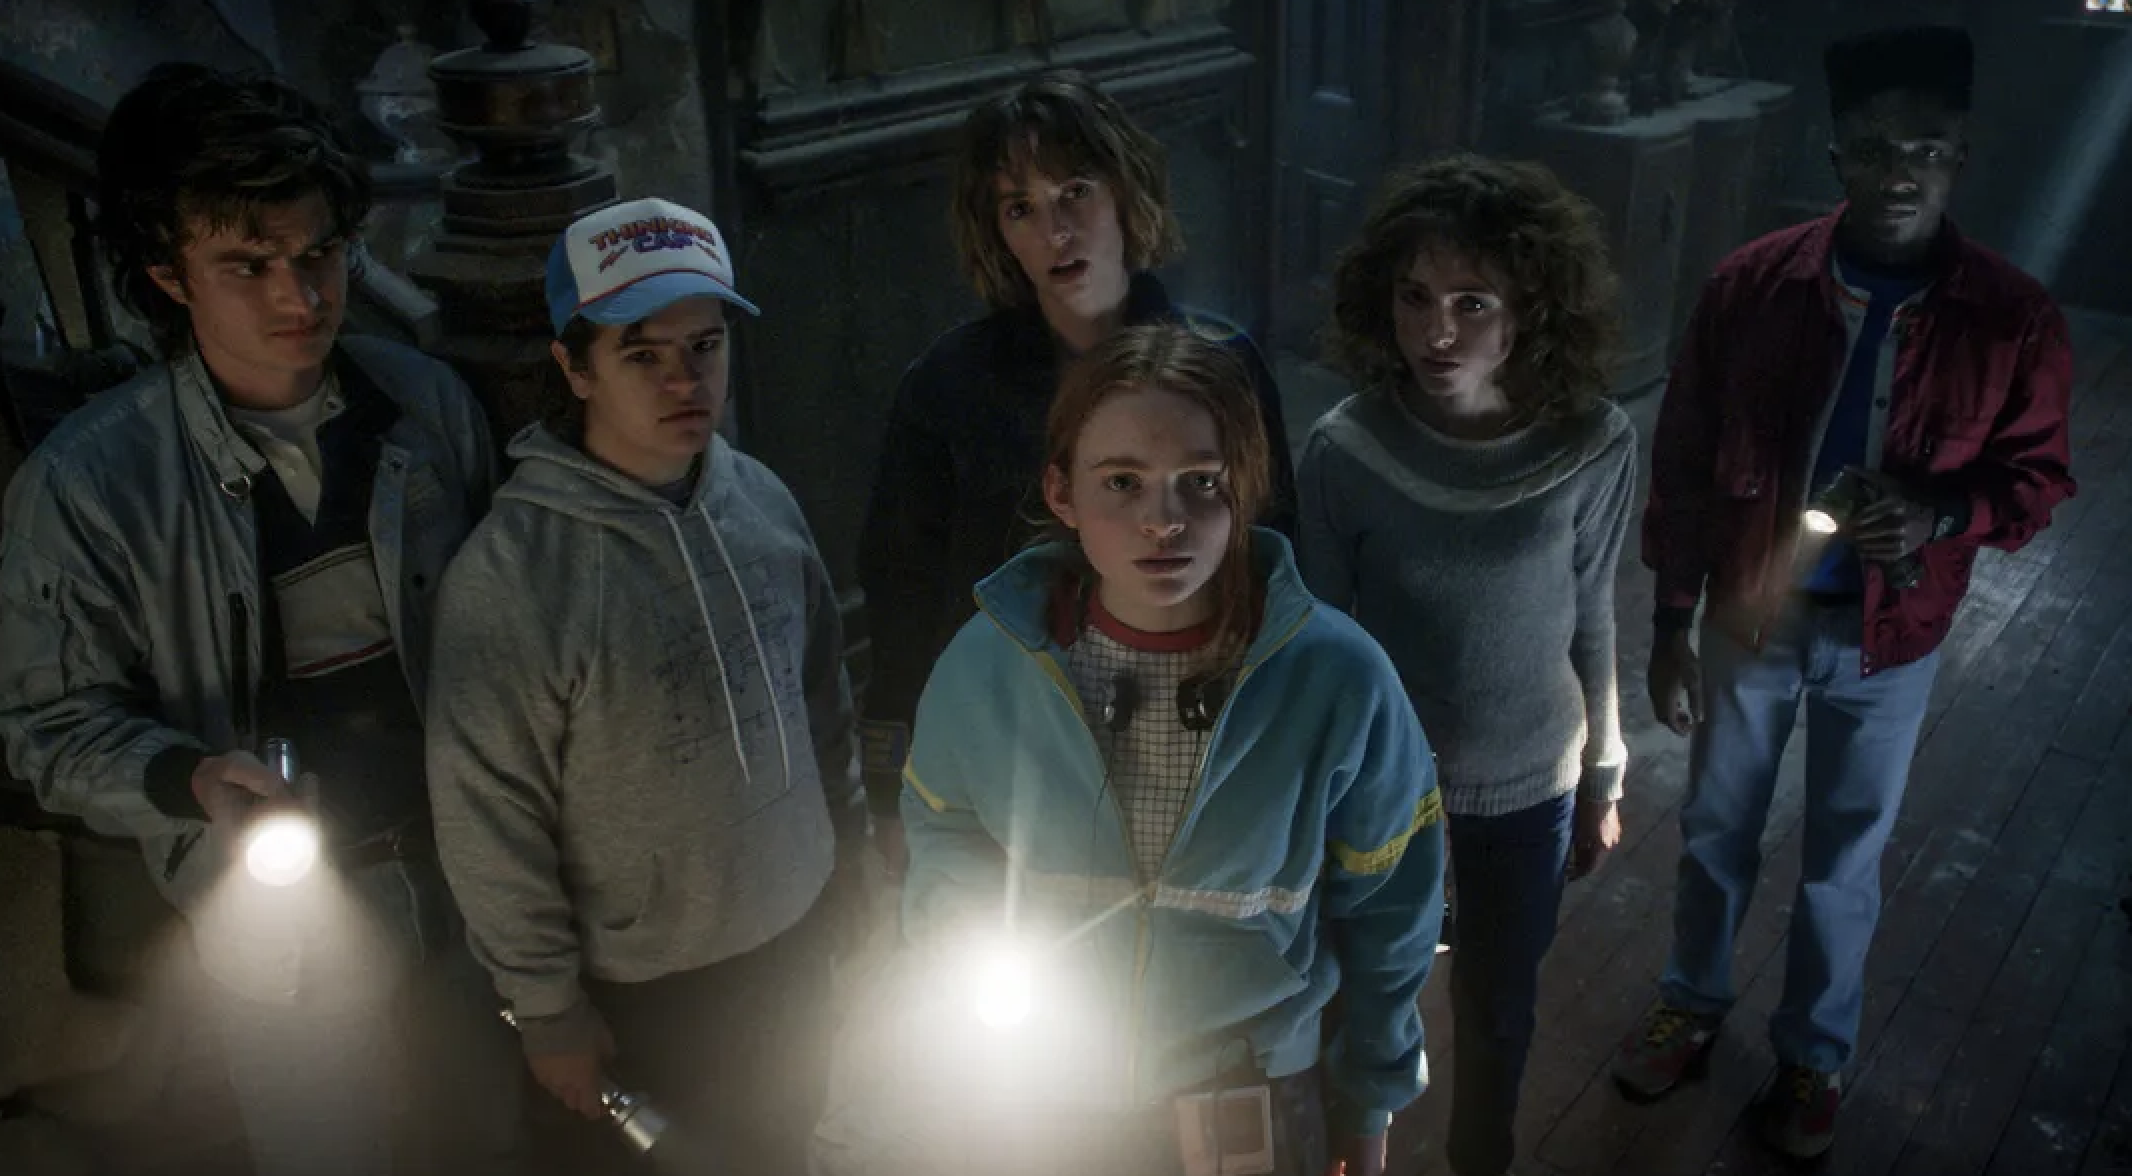 The kids from "Stranger Things" with flashlights in the dark